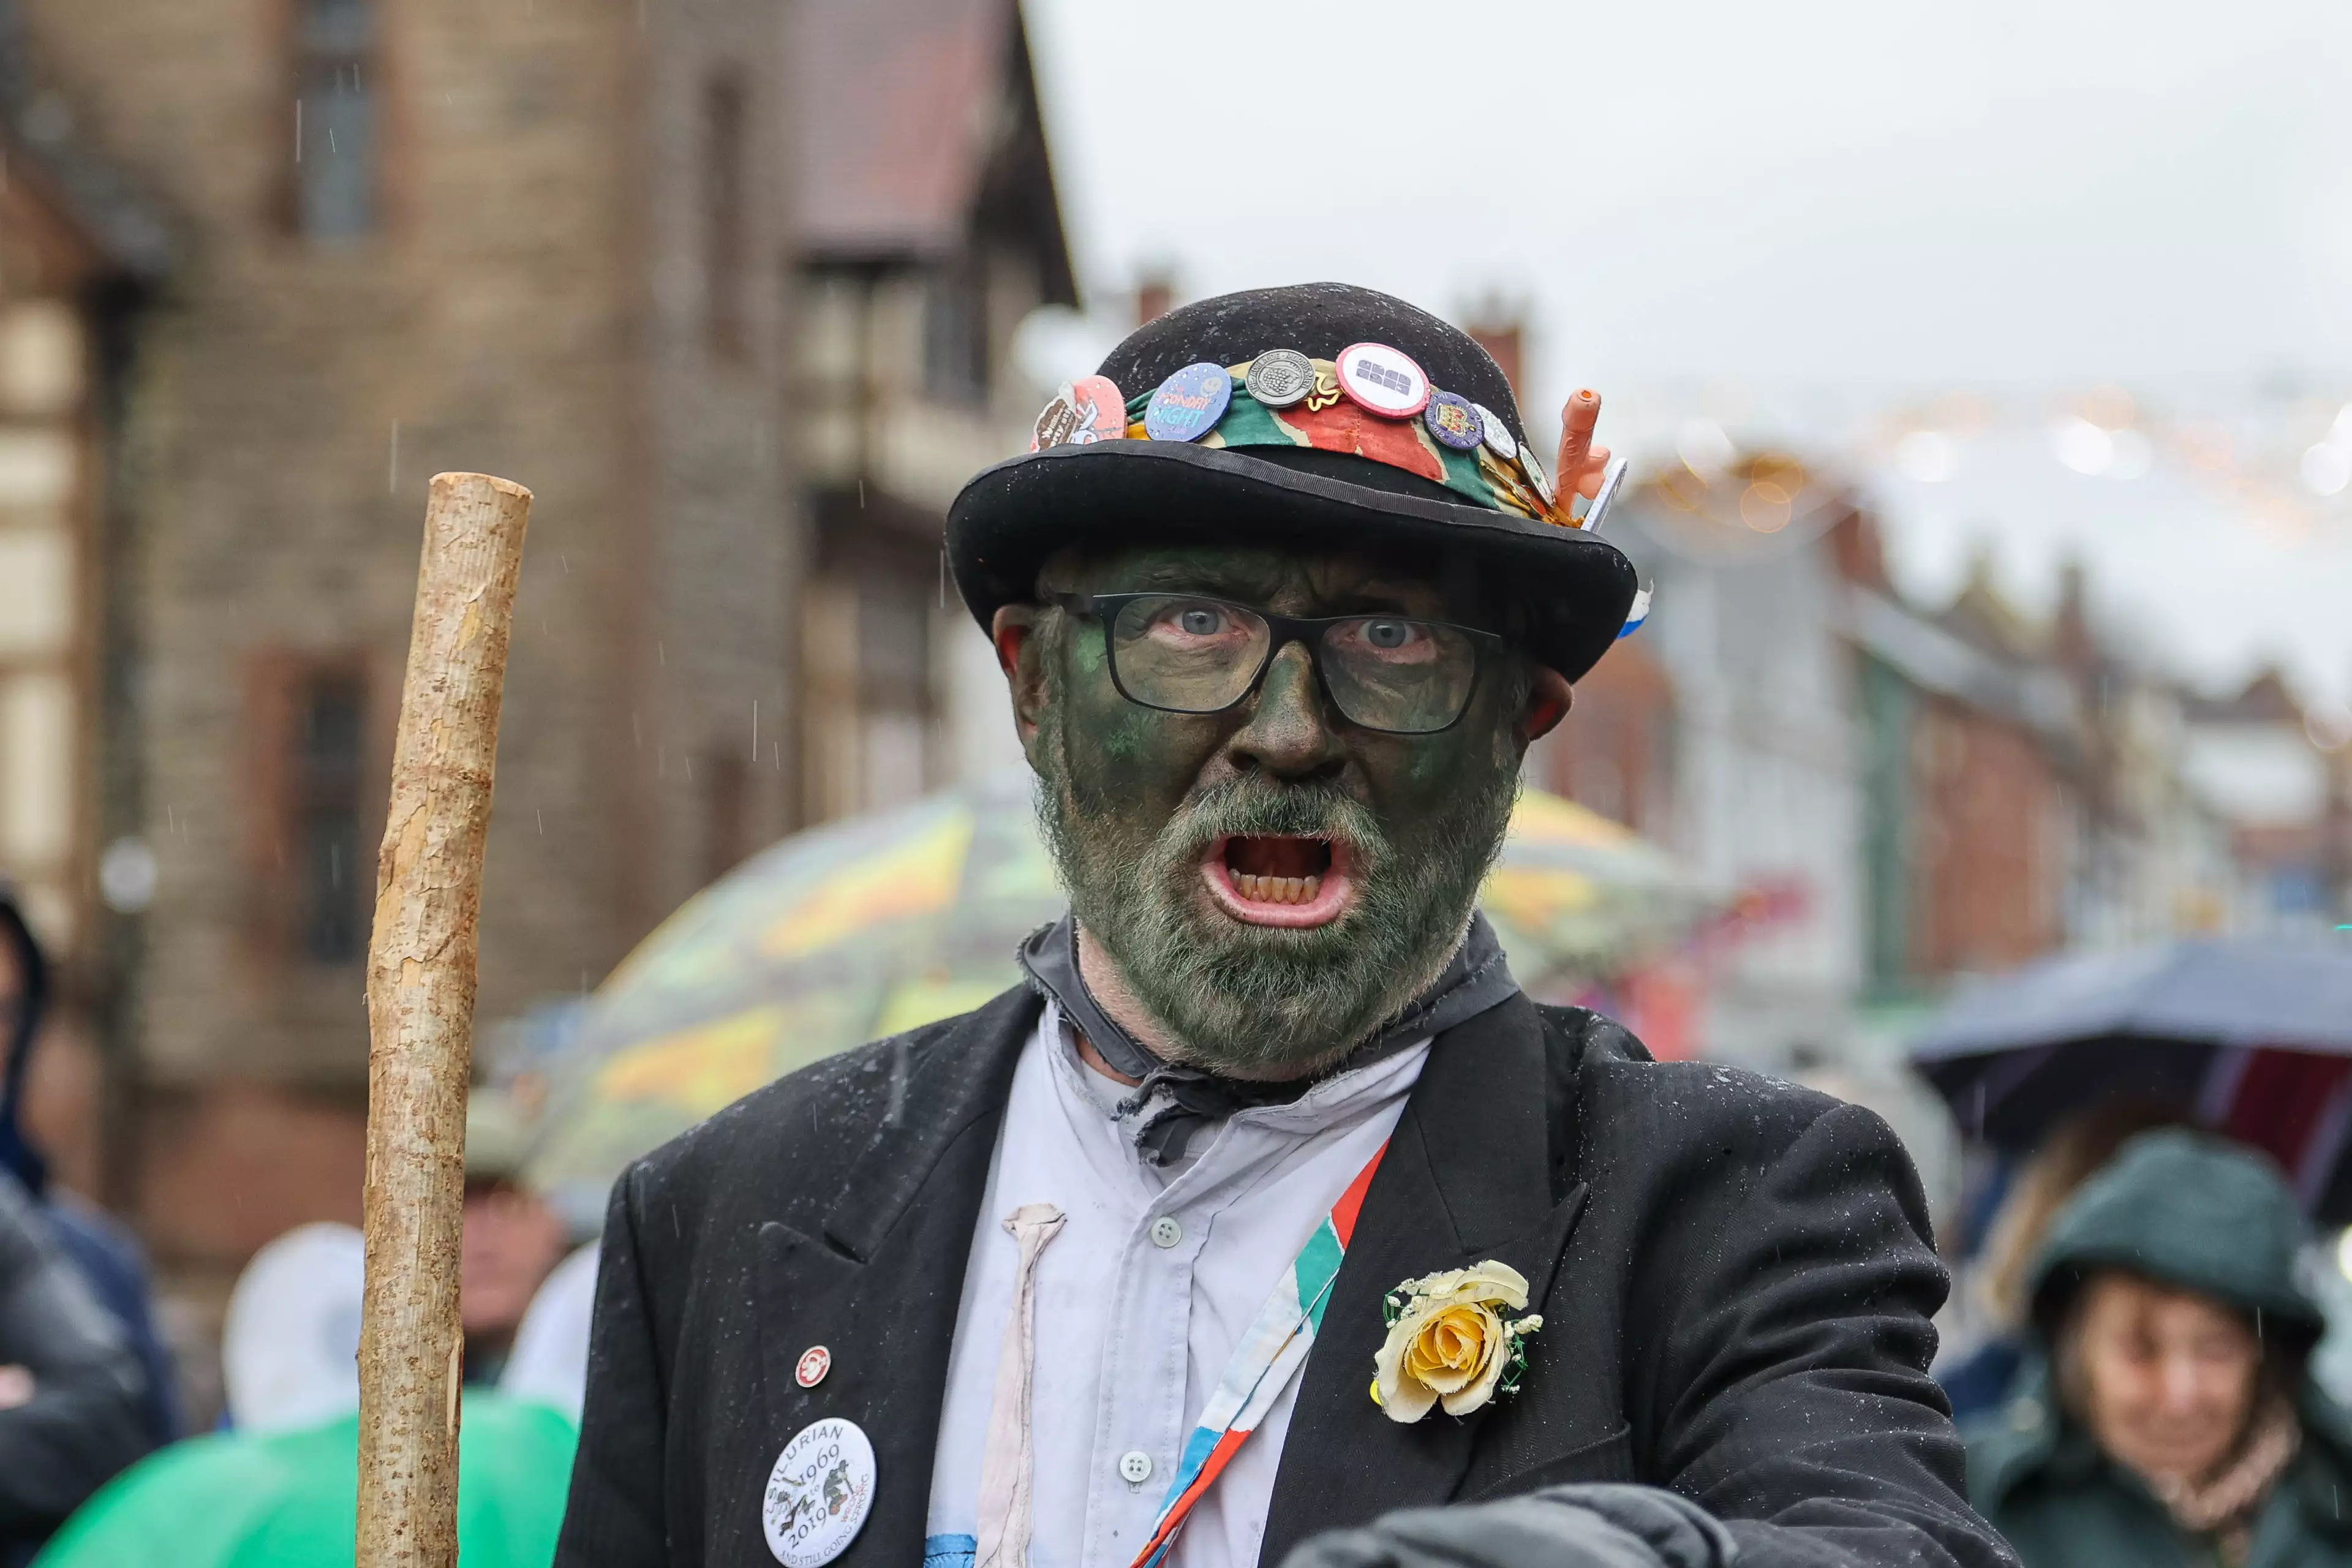 Morris Dancers Dance In Green Paint For First Time In 500 Years